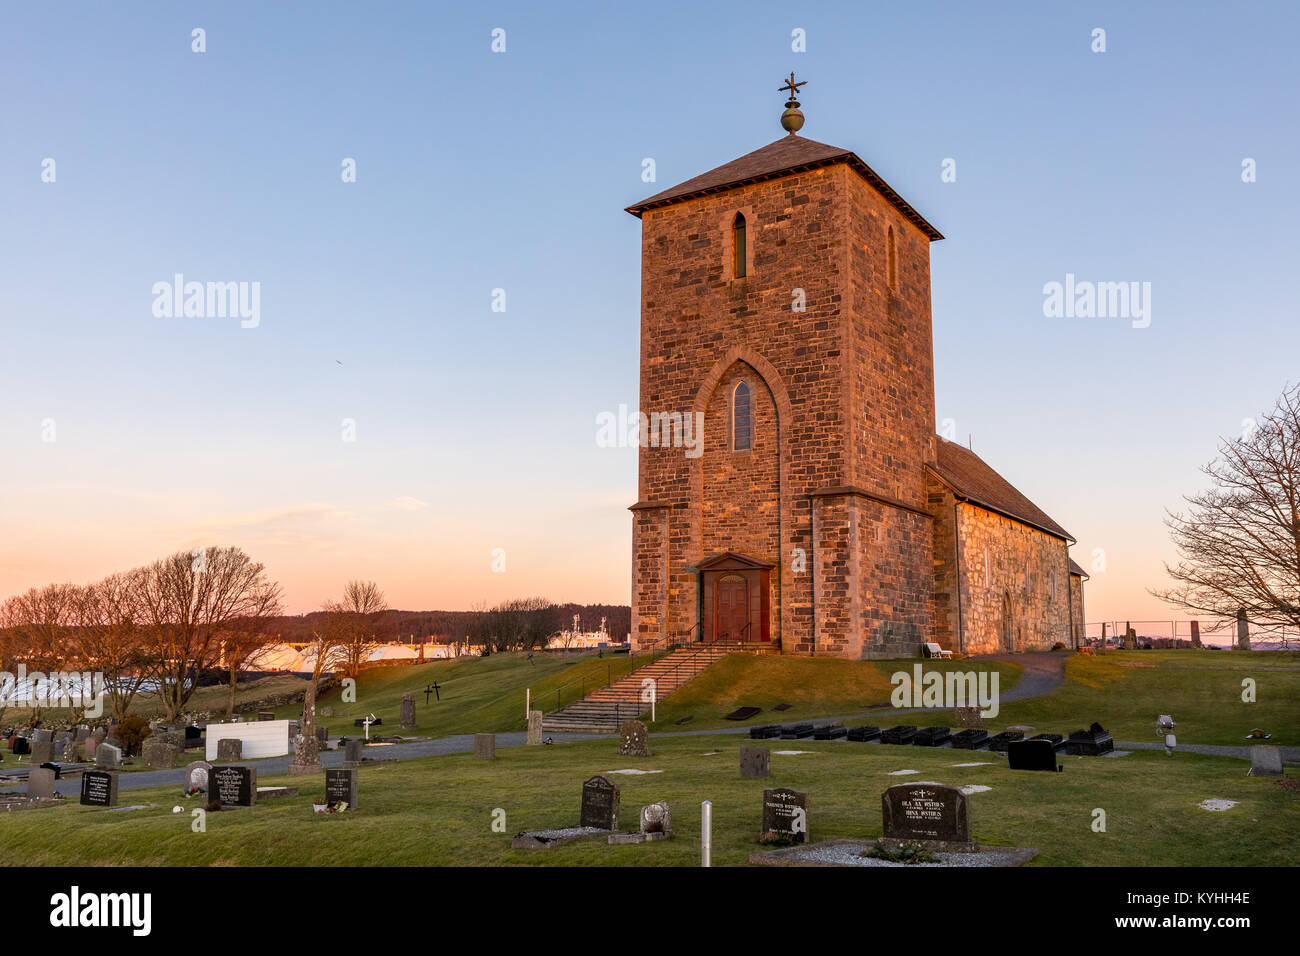 Avaldsnes in Karmoy, Norway, January 9, 2018: The medieval stone church at Avaldsnes, on the Island of Karmoy, Norway, vertical image of the front entrance and stairs Stock Photo